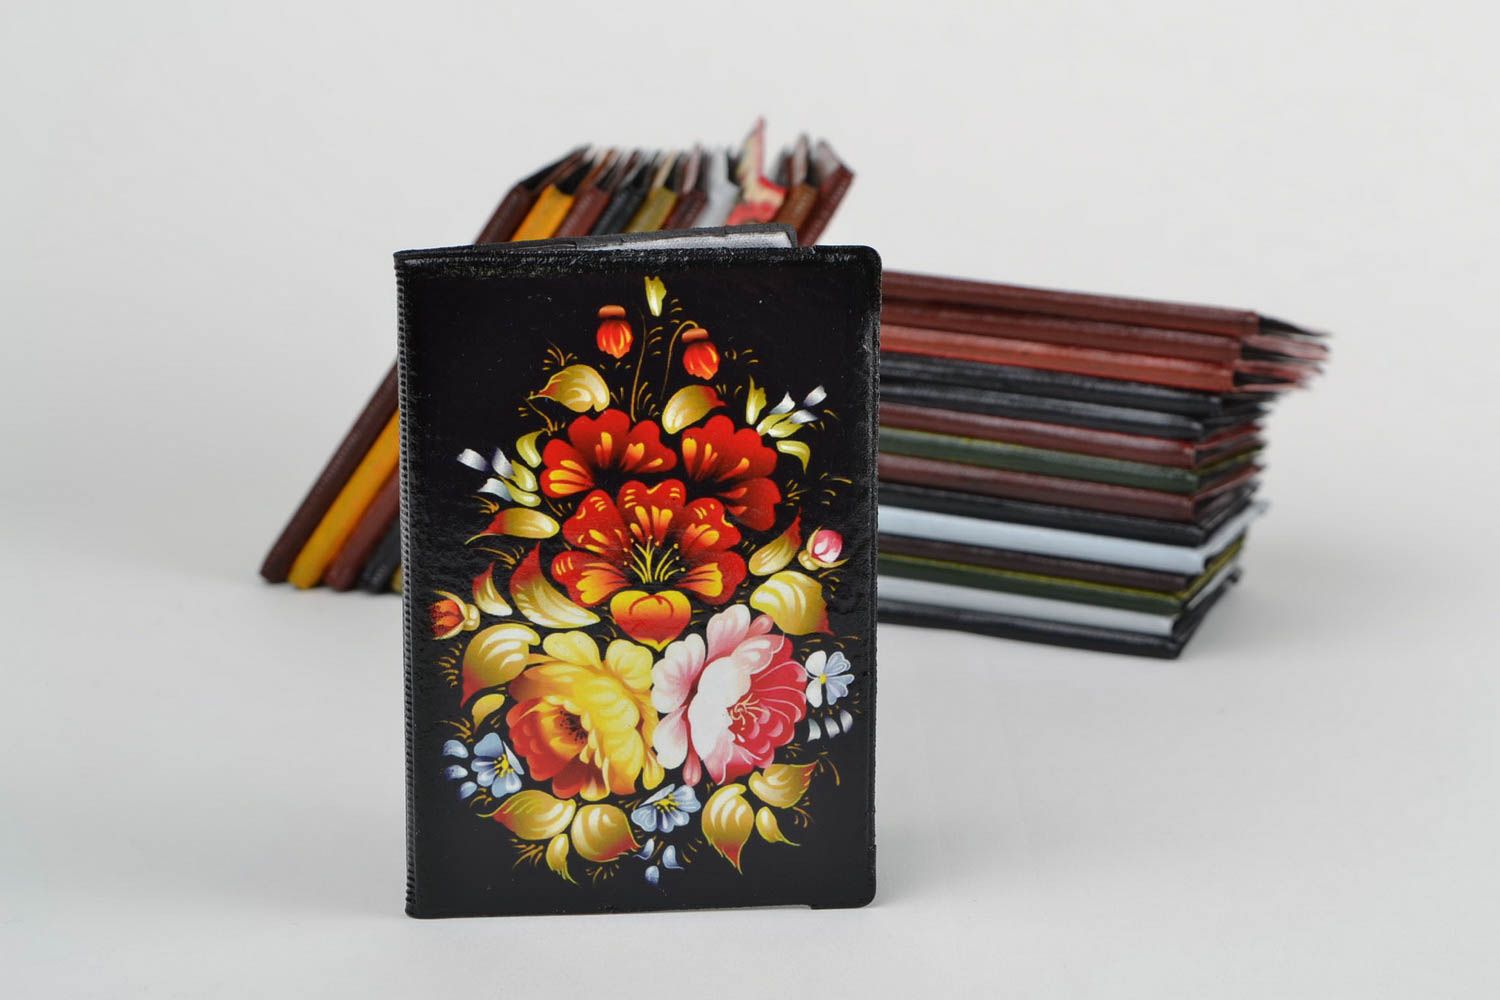 Handmade black faux leather passport cover with decoupage image bright flowers photo 1